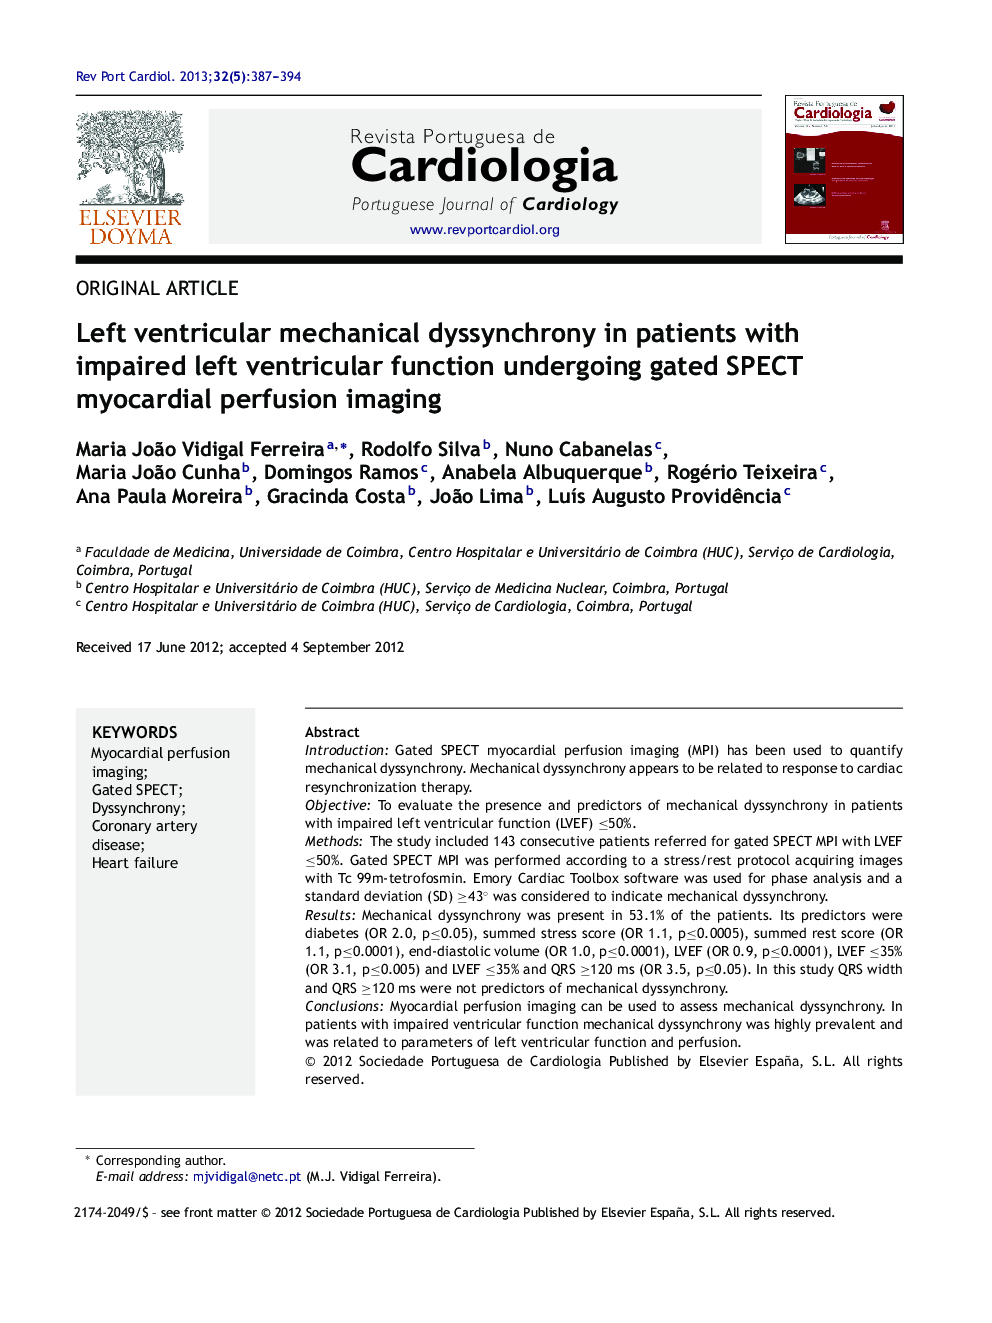 Left ventricular mechanical dyssynchrony in patients with impaired left ventricular function undergoing gated SPECT myocardial perfusion imaging